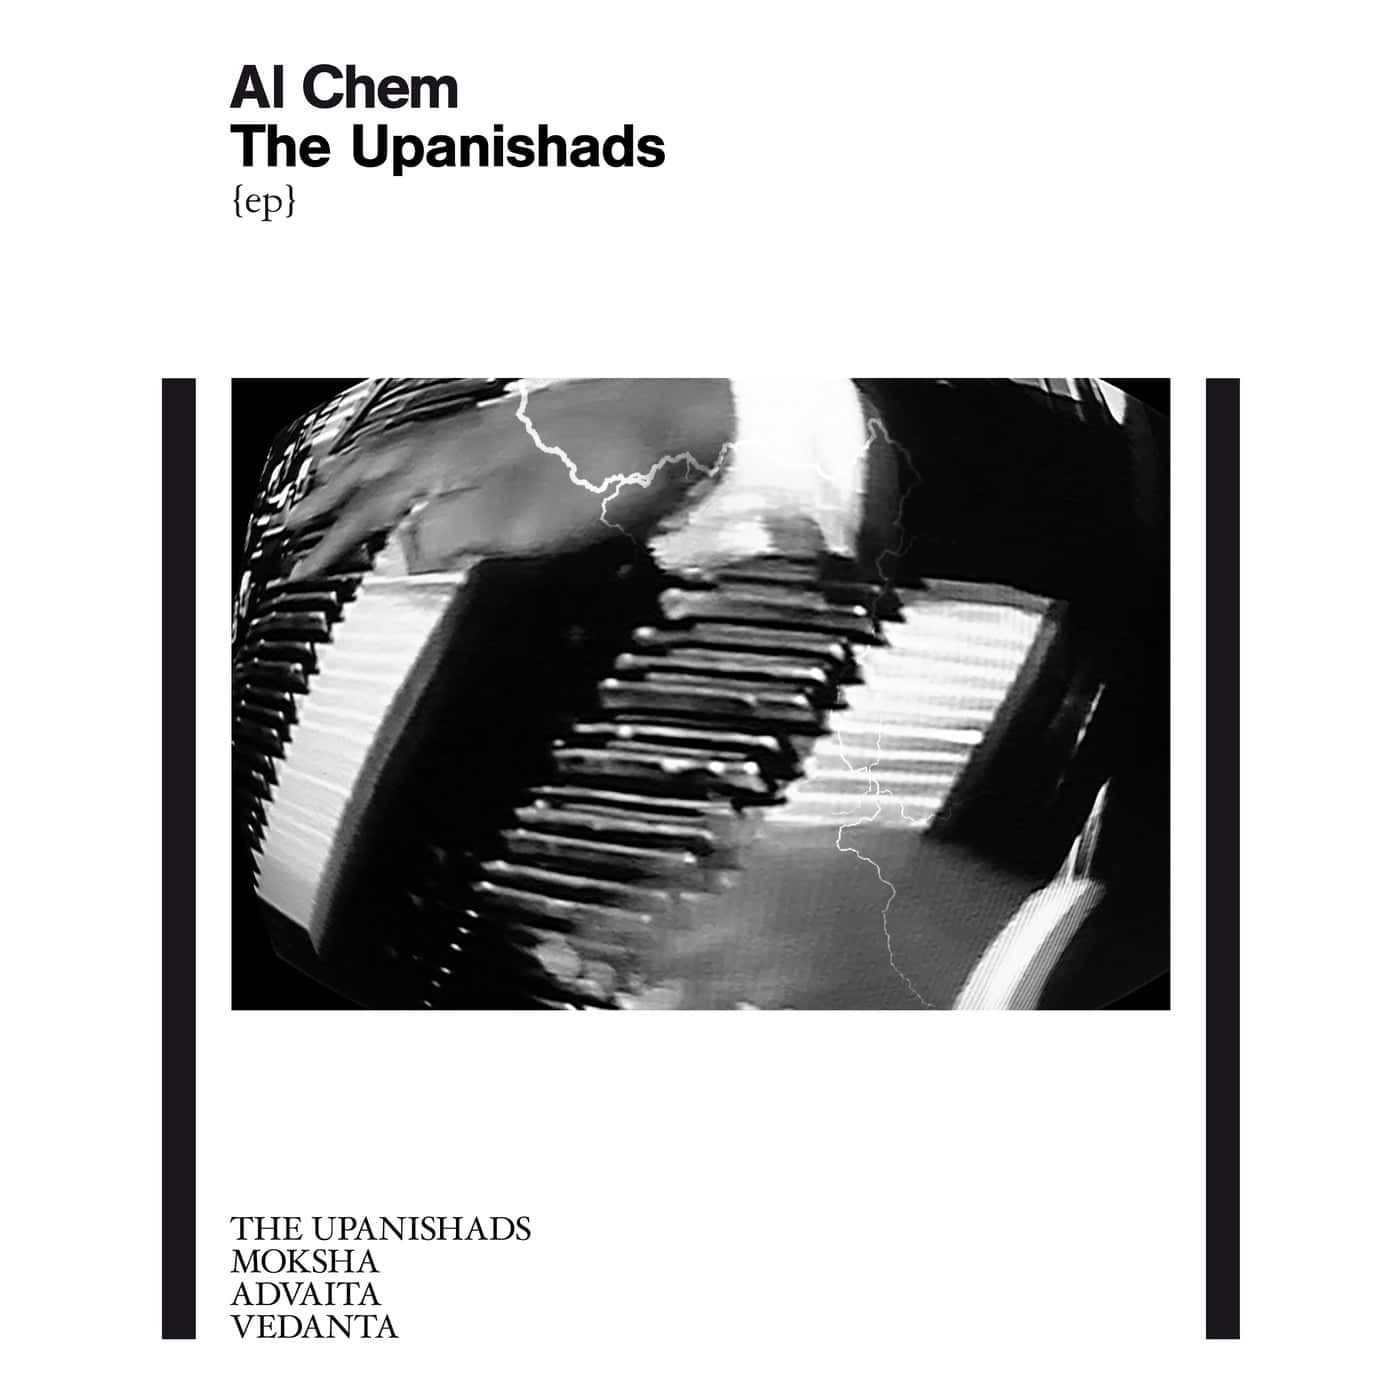 image cover: Al Chem - The Upanishads EP / CPT5893